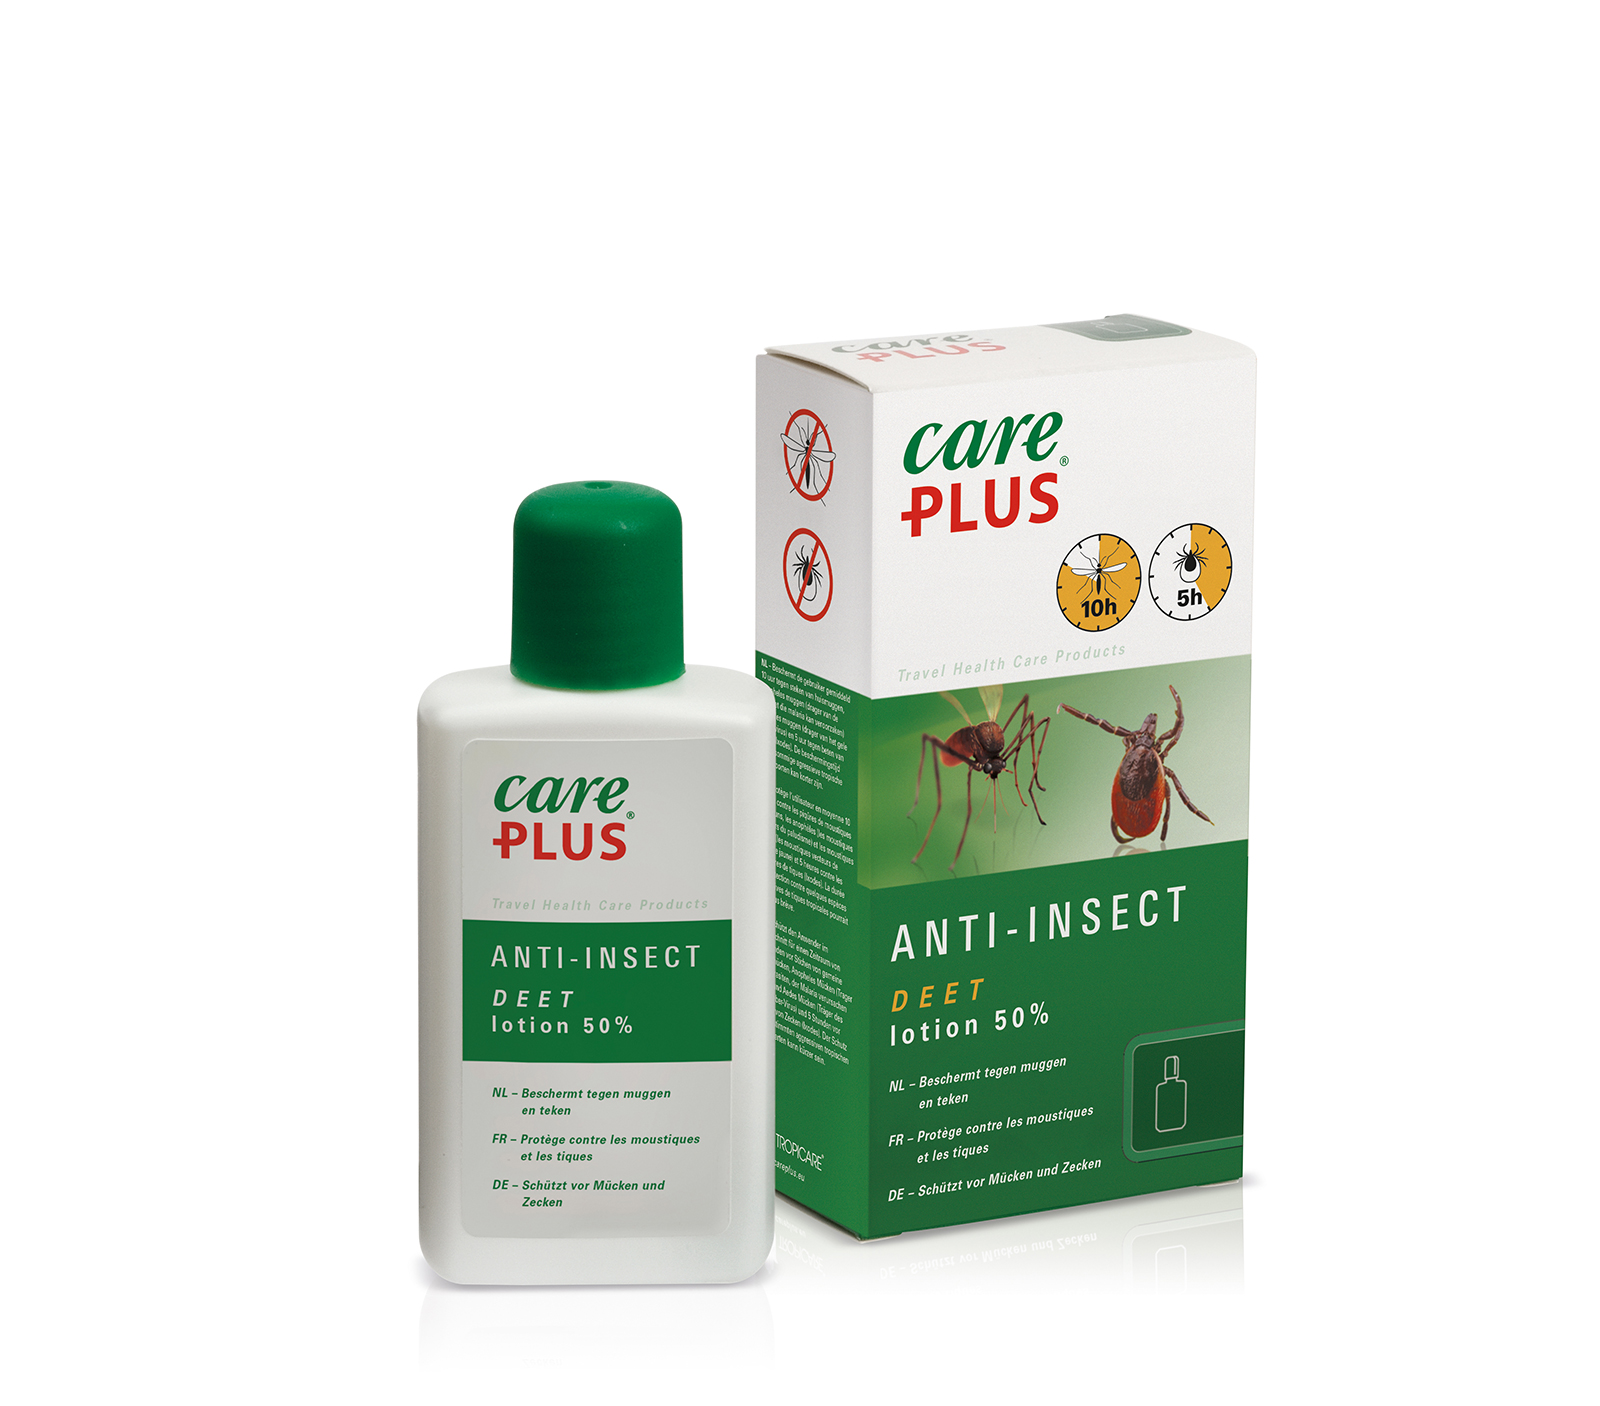 Care Plus Anti-insect Deet Lotion 50%